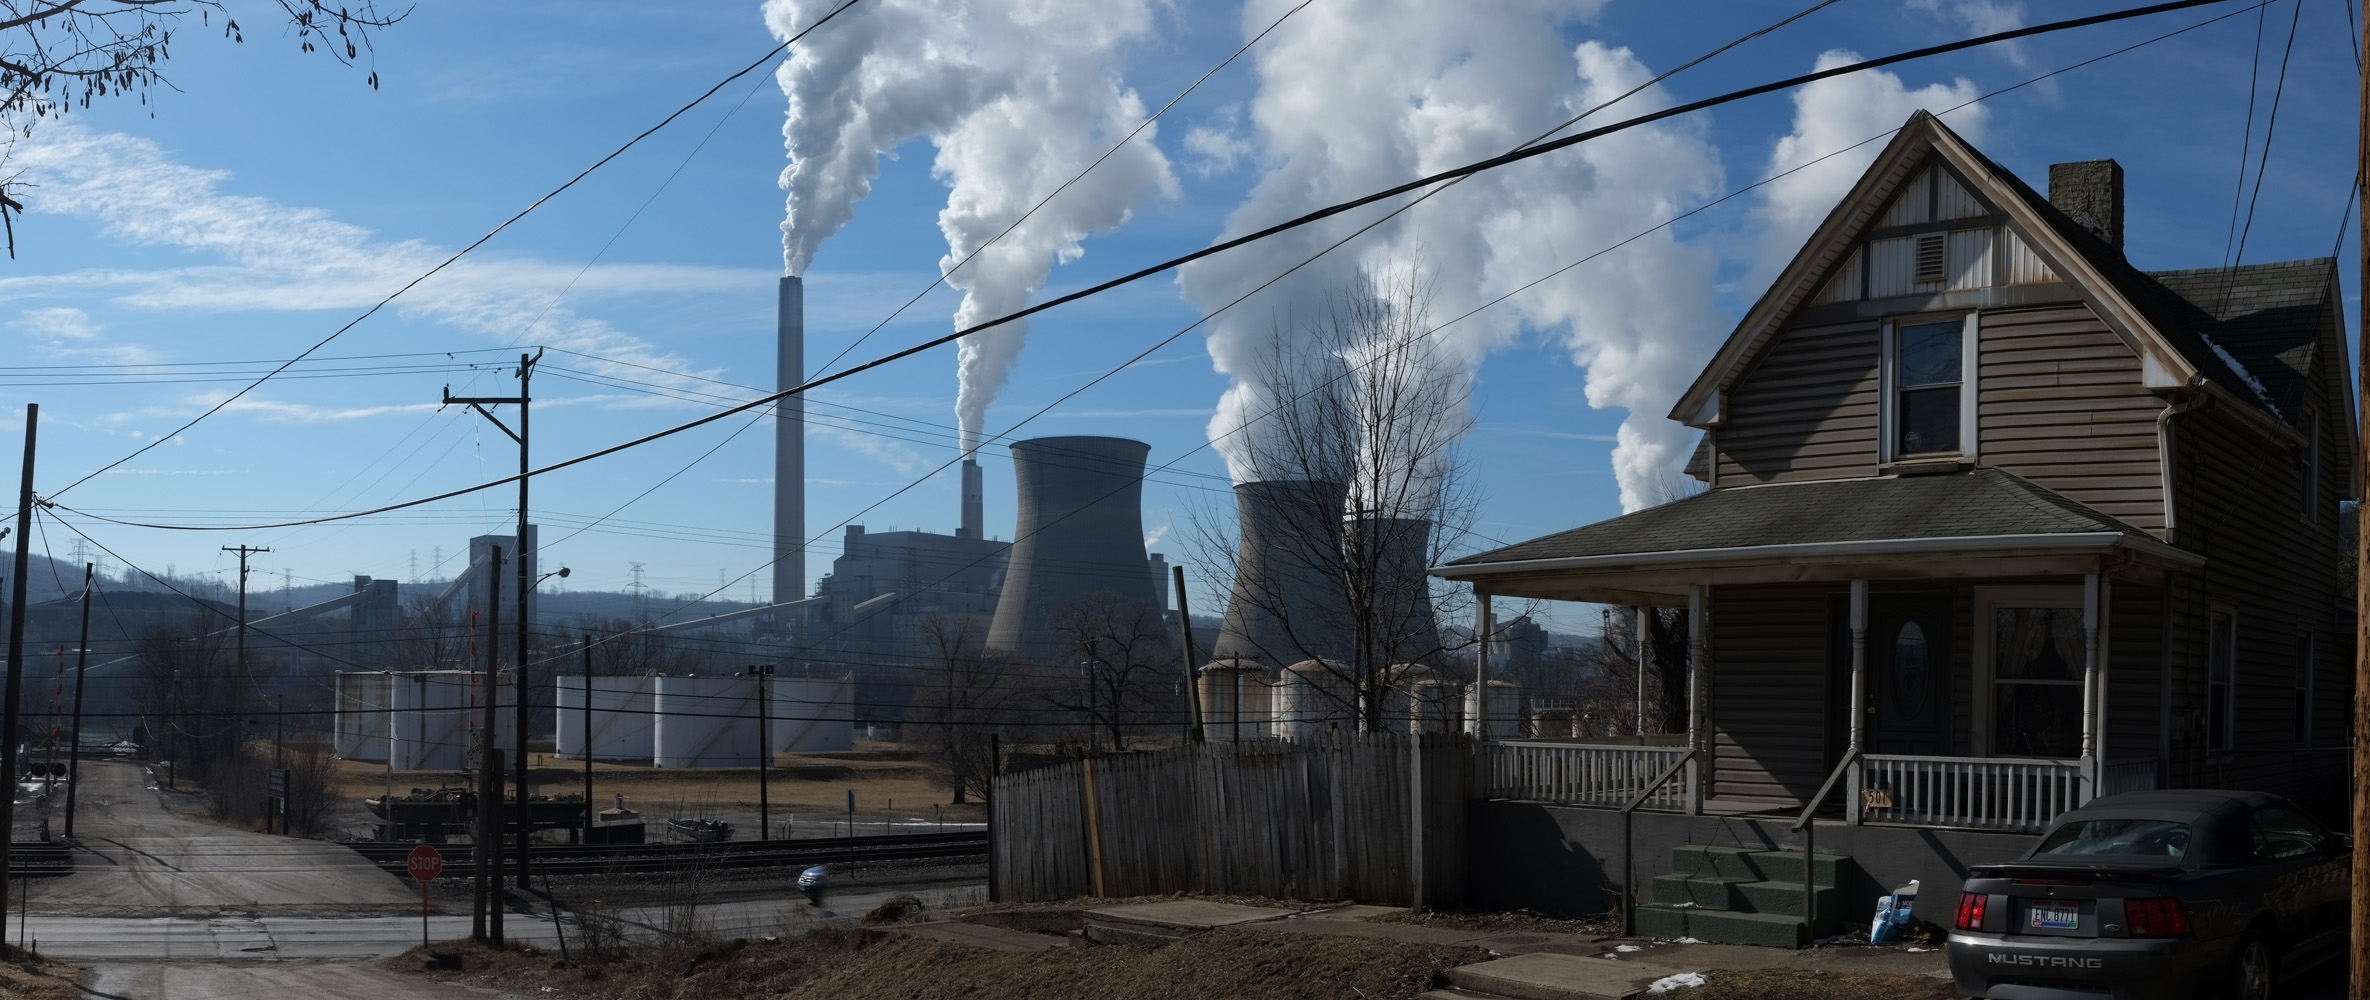    
  
 
  
  The Bruce Mansfield coal-fired power plant in Shippingport, Pa., generates power enough to supply one and a half million homes.&nbsp; It sits alongside the Ohio River in Beaver County, about 30 miles north-west of Pittsburgh  
  
 Norma